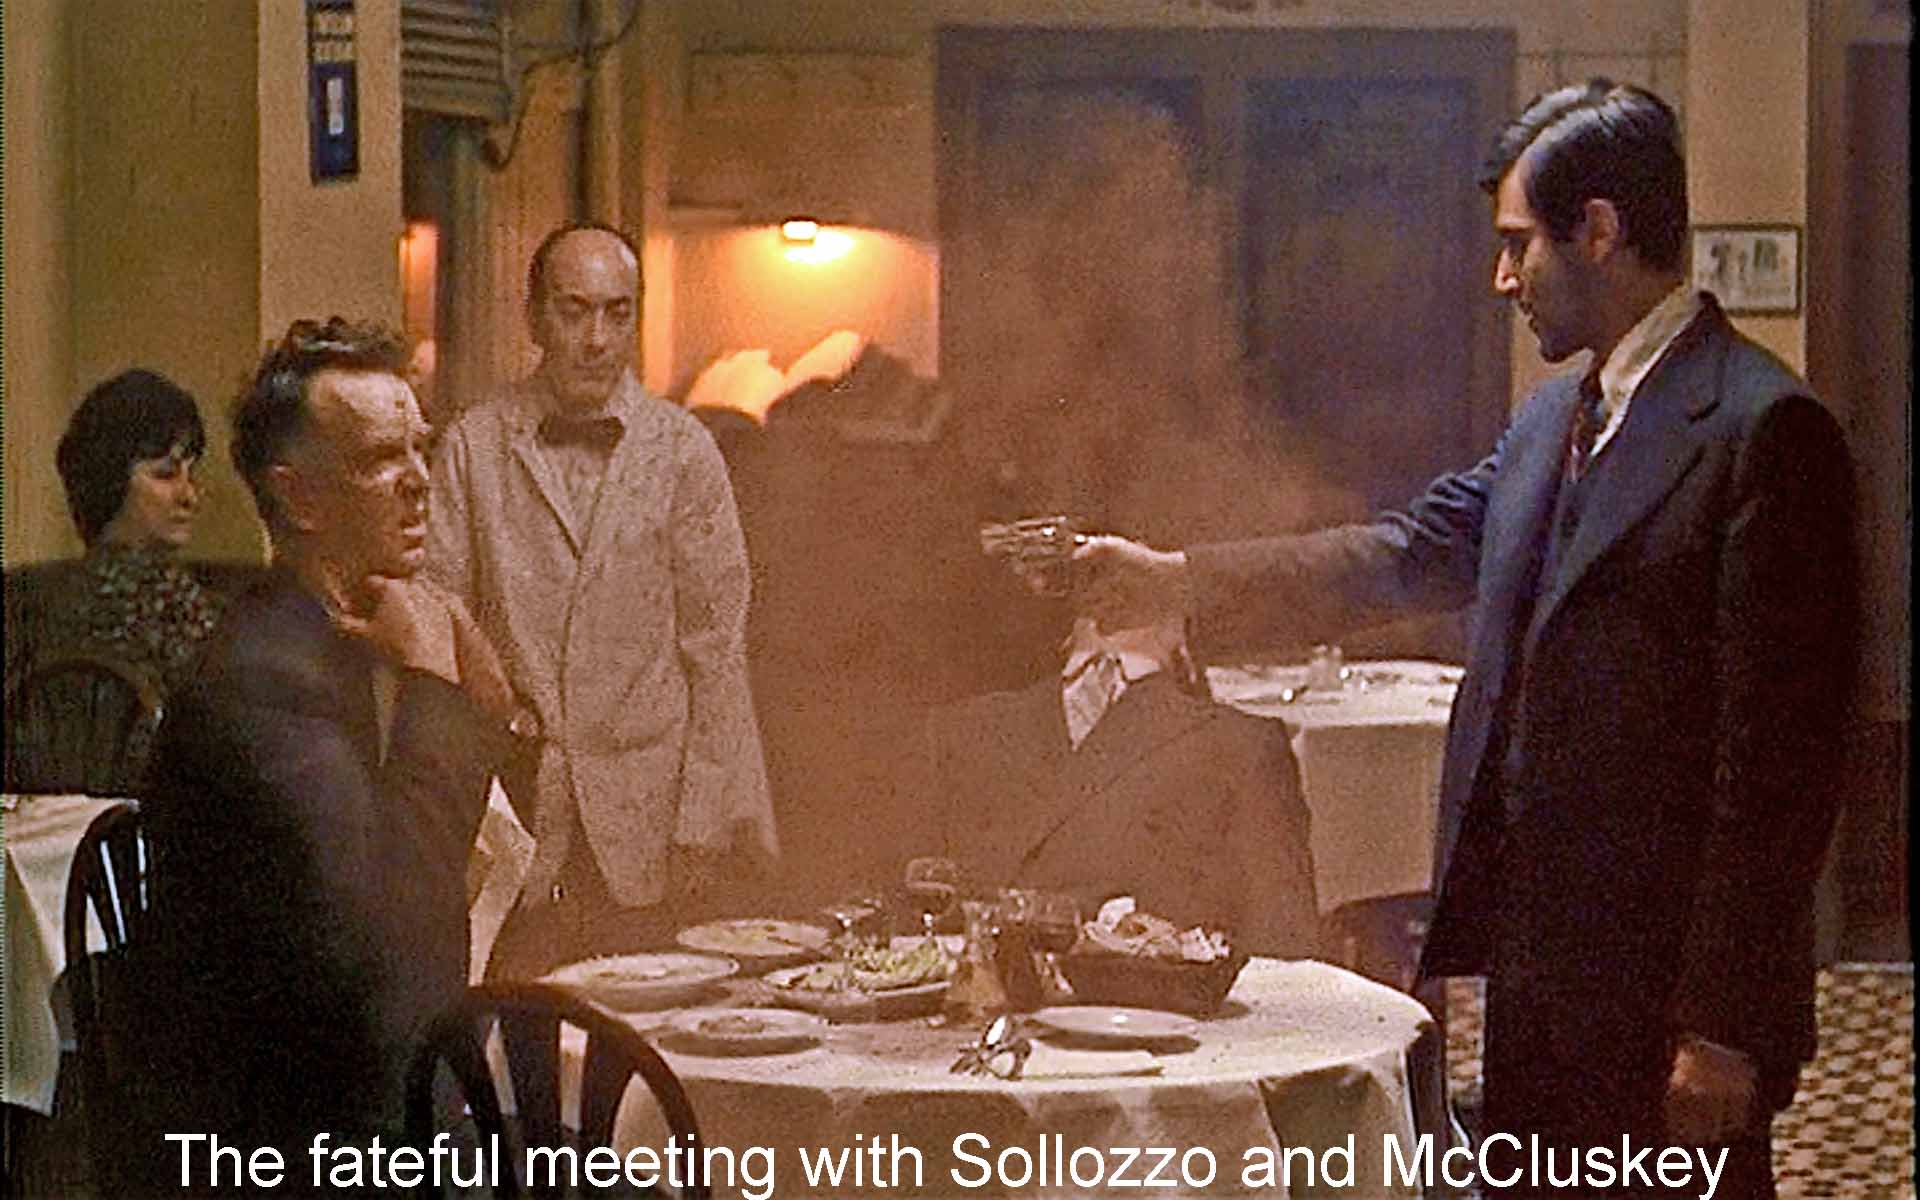 The fateful meeting with Sollozzo and McCluskey